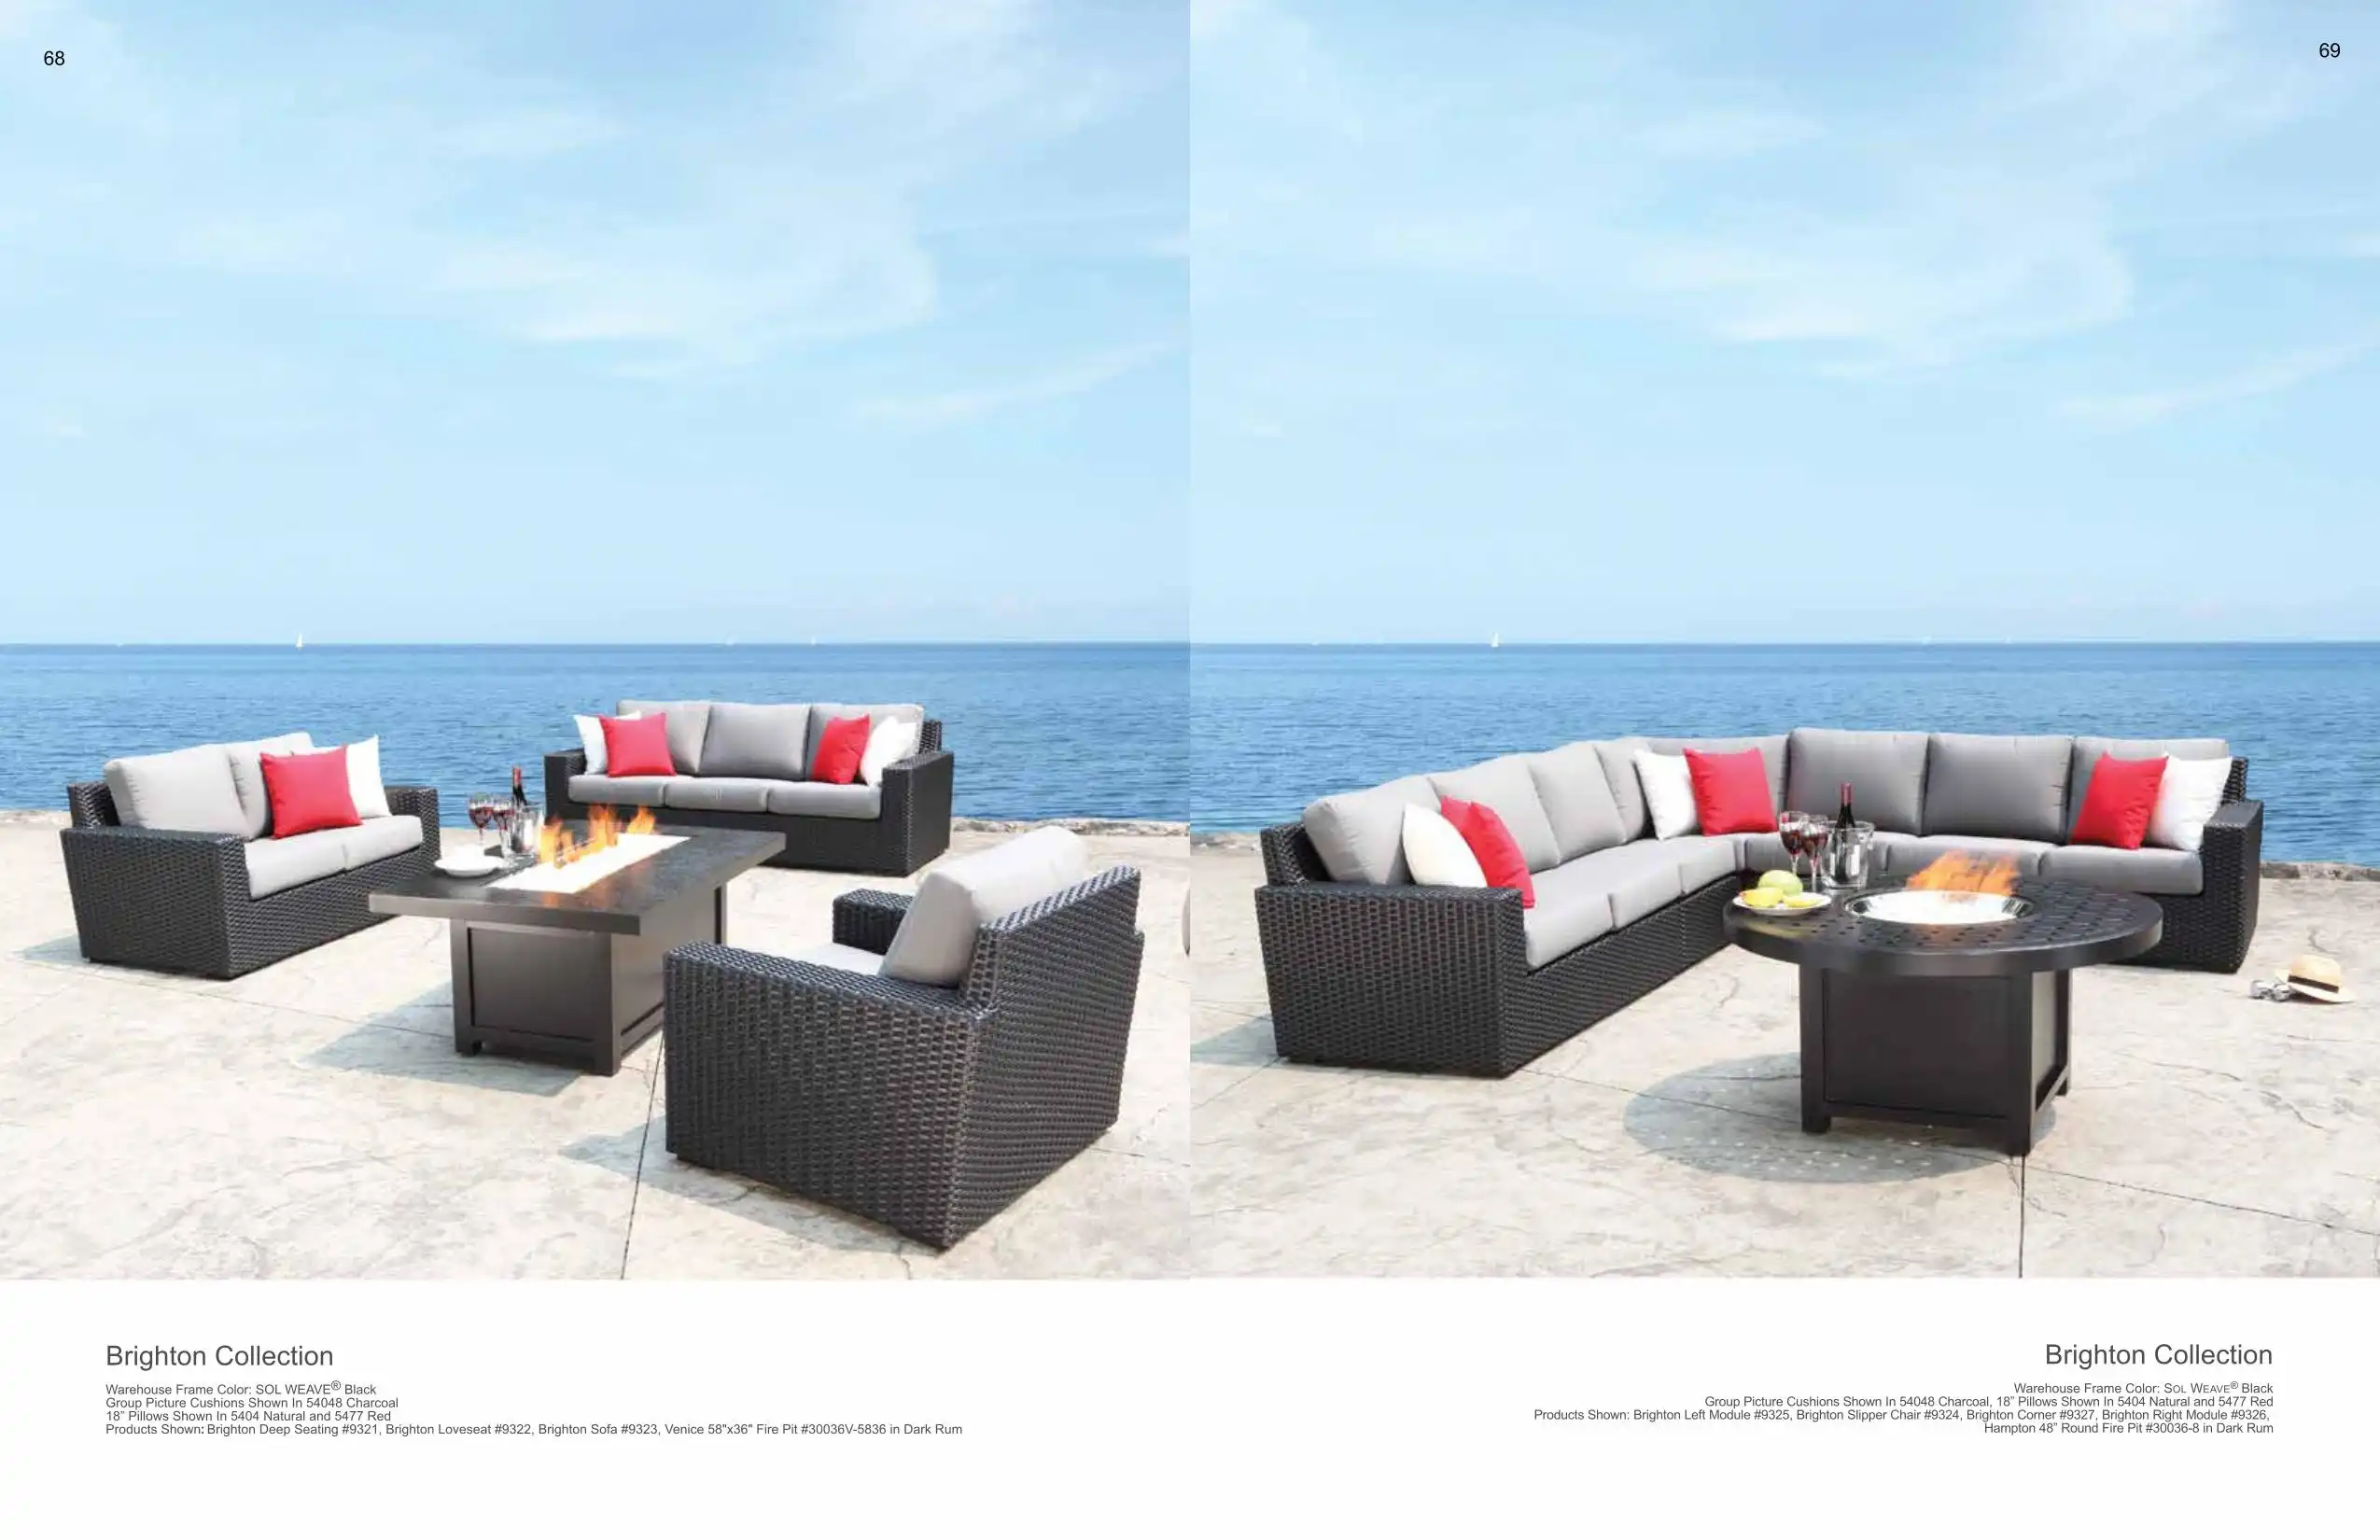 BRIGHTON Sofas & Sectional (WICKER) Collection(s) by Cabana Coast